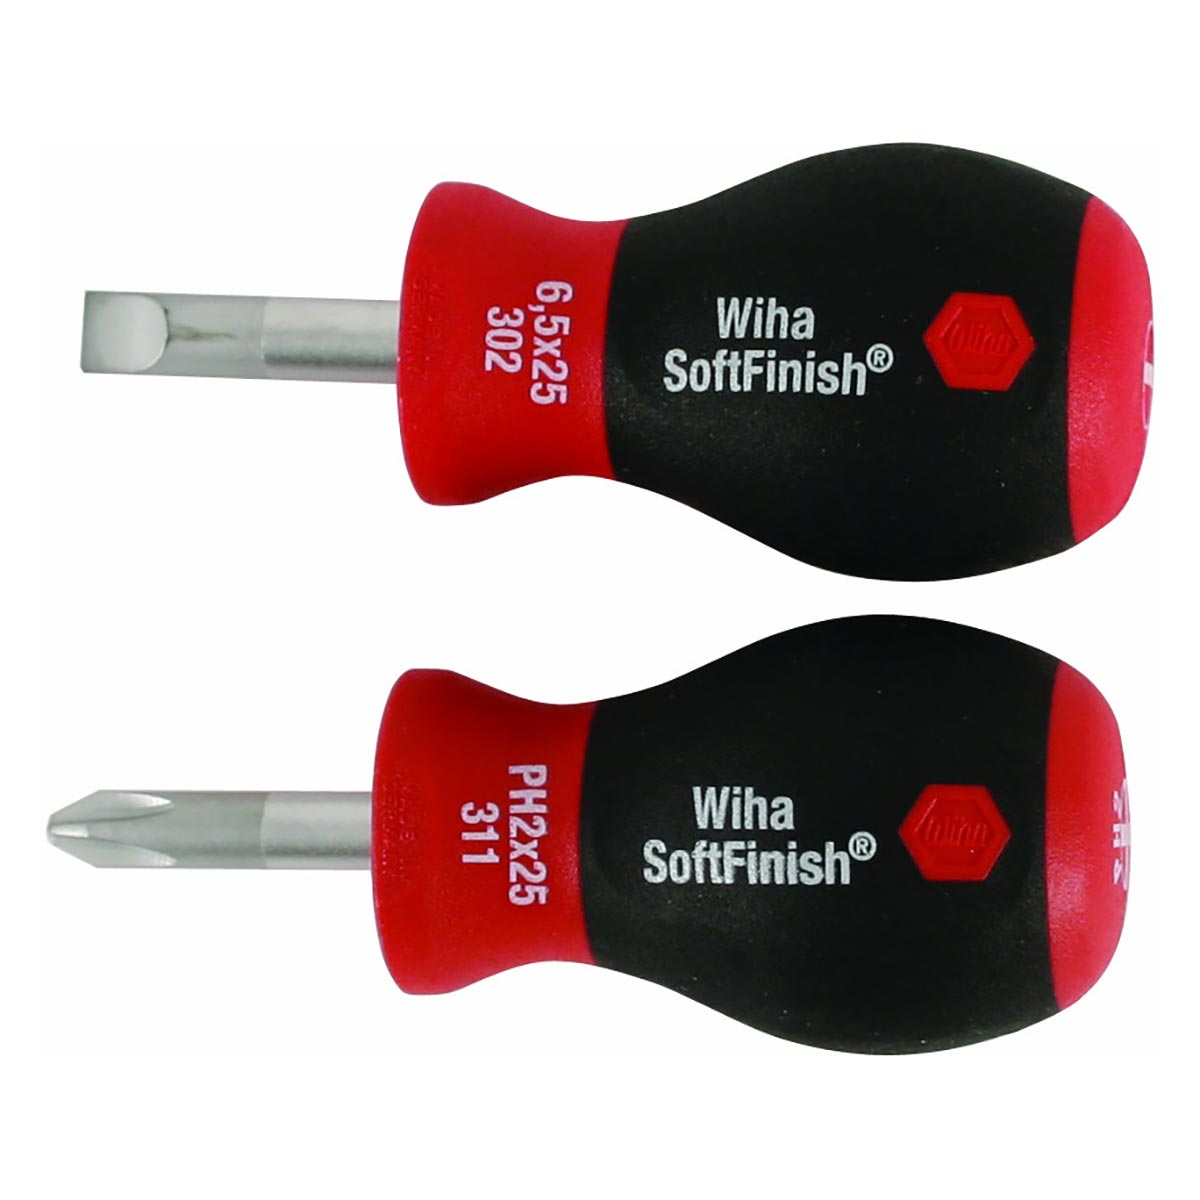 Wiha Softfinish Stubby Slotted And Phillips Screwdriver Set (2 Piece Set)